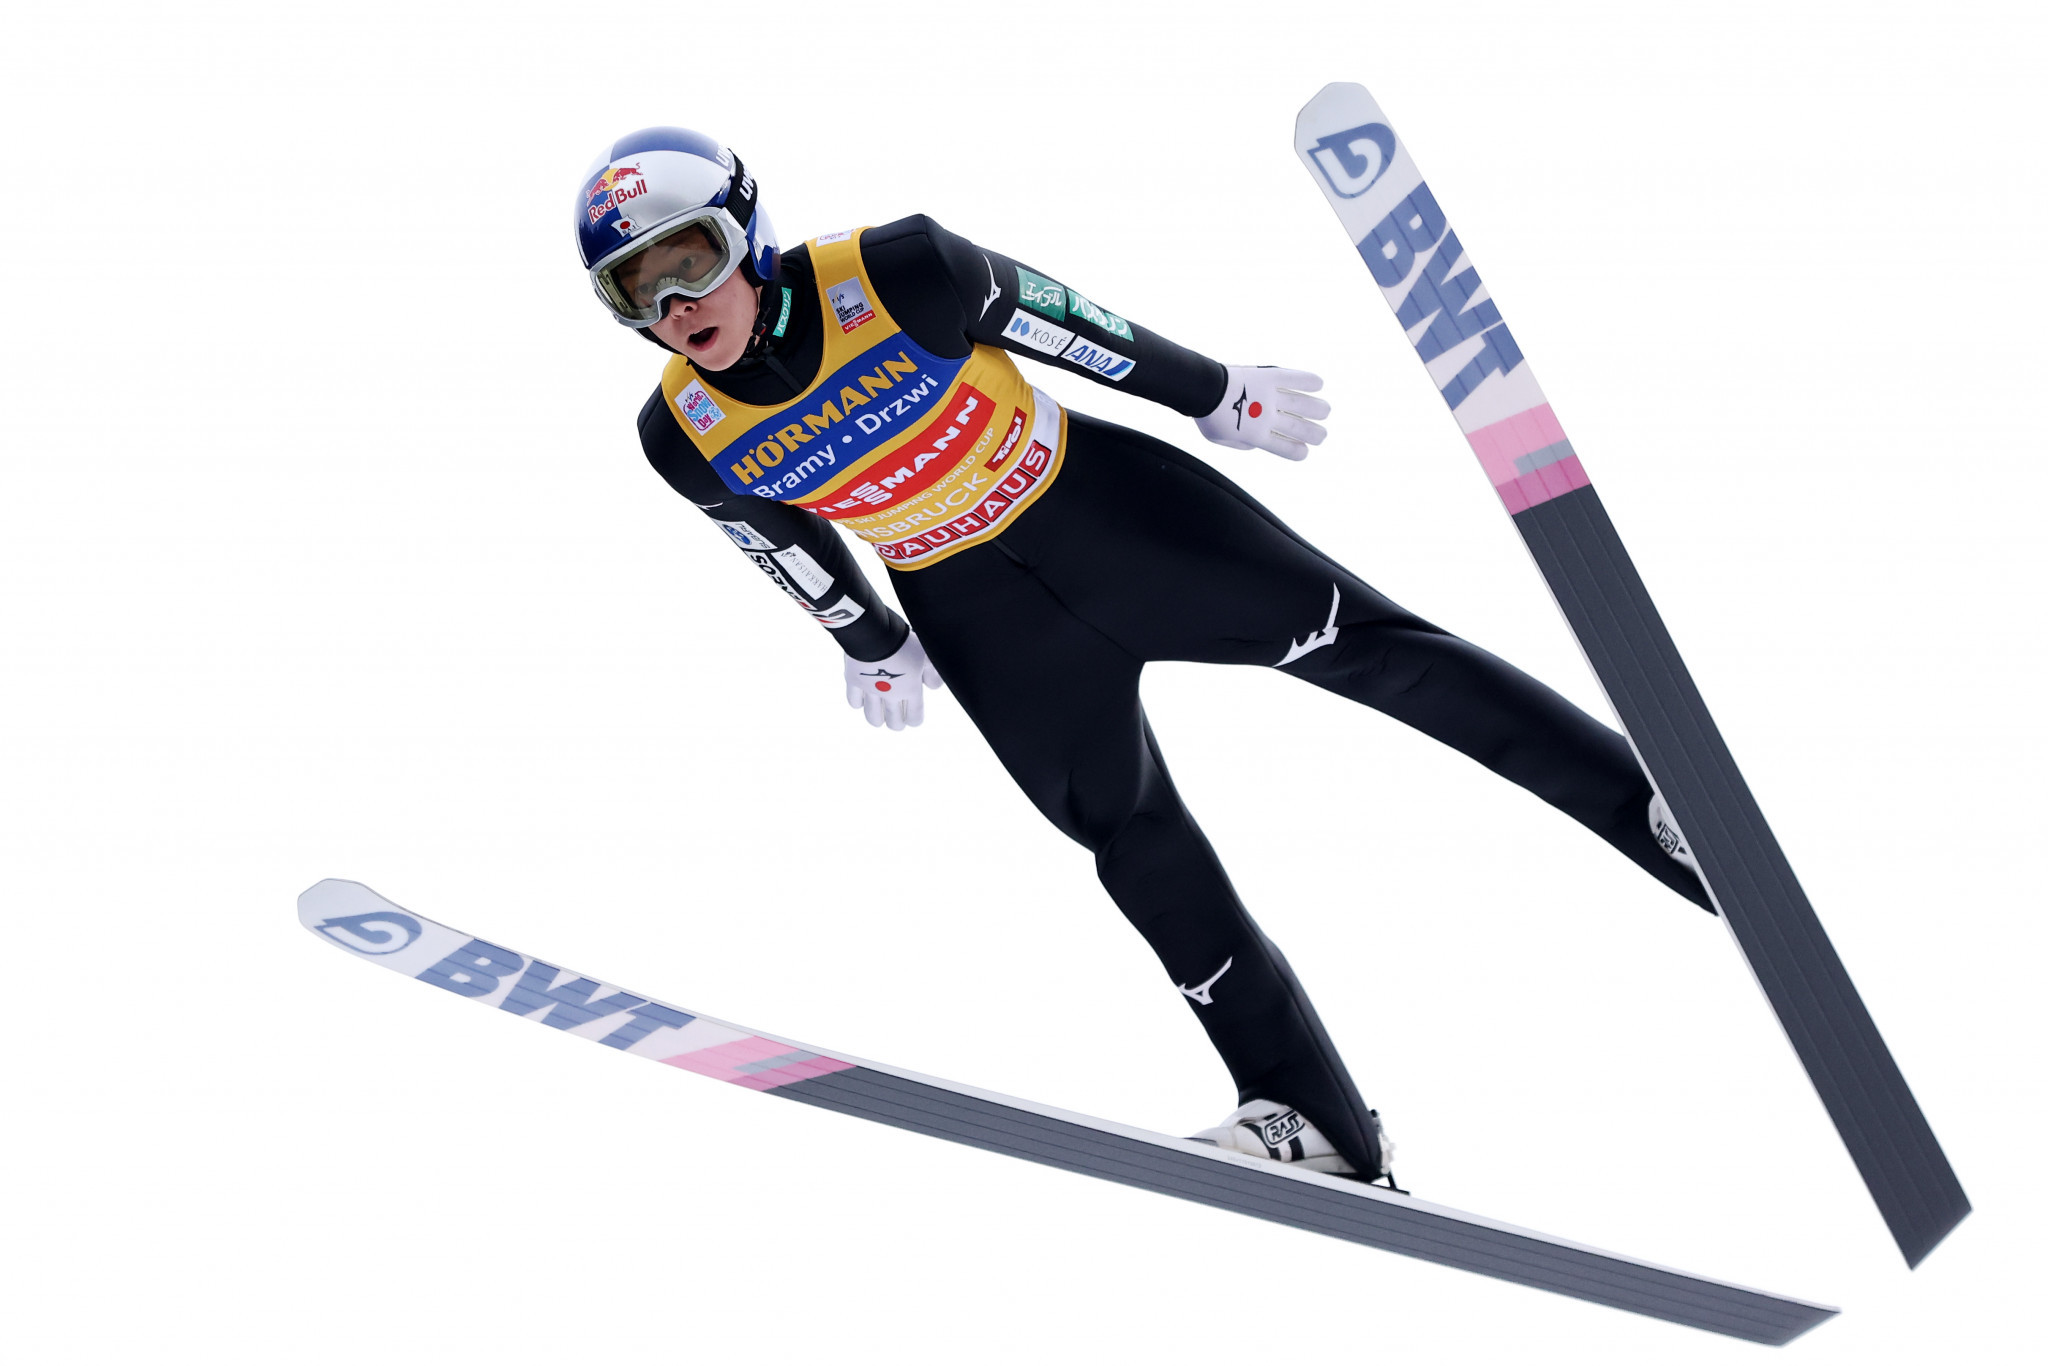 Japan's Ryōyū Kobayashi is the overall leader going into the men's Ski Jumping World Cup in Zakopane ©Getty Images